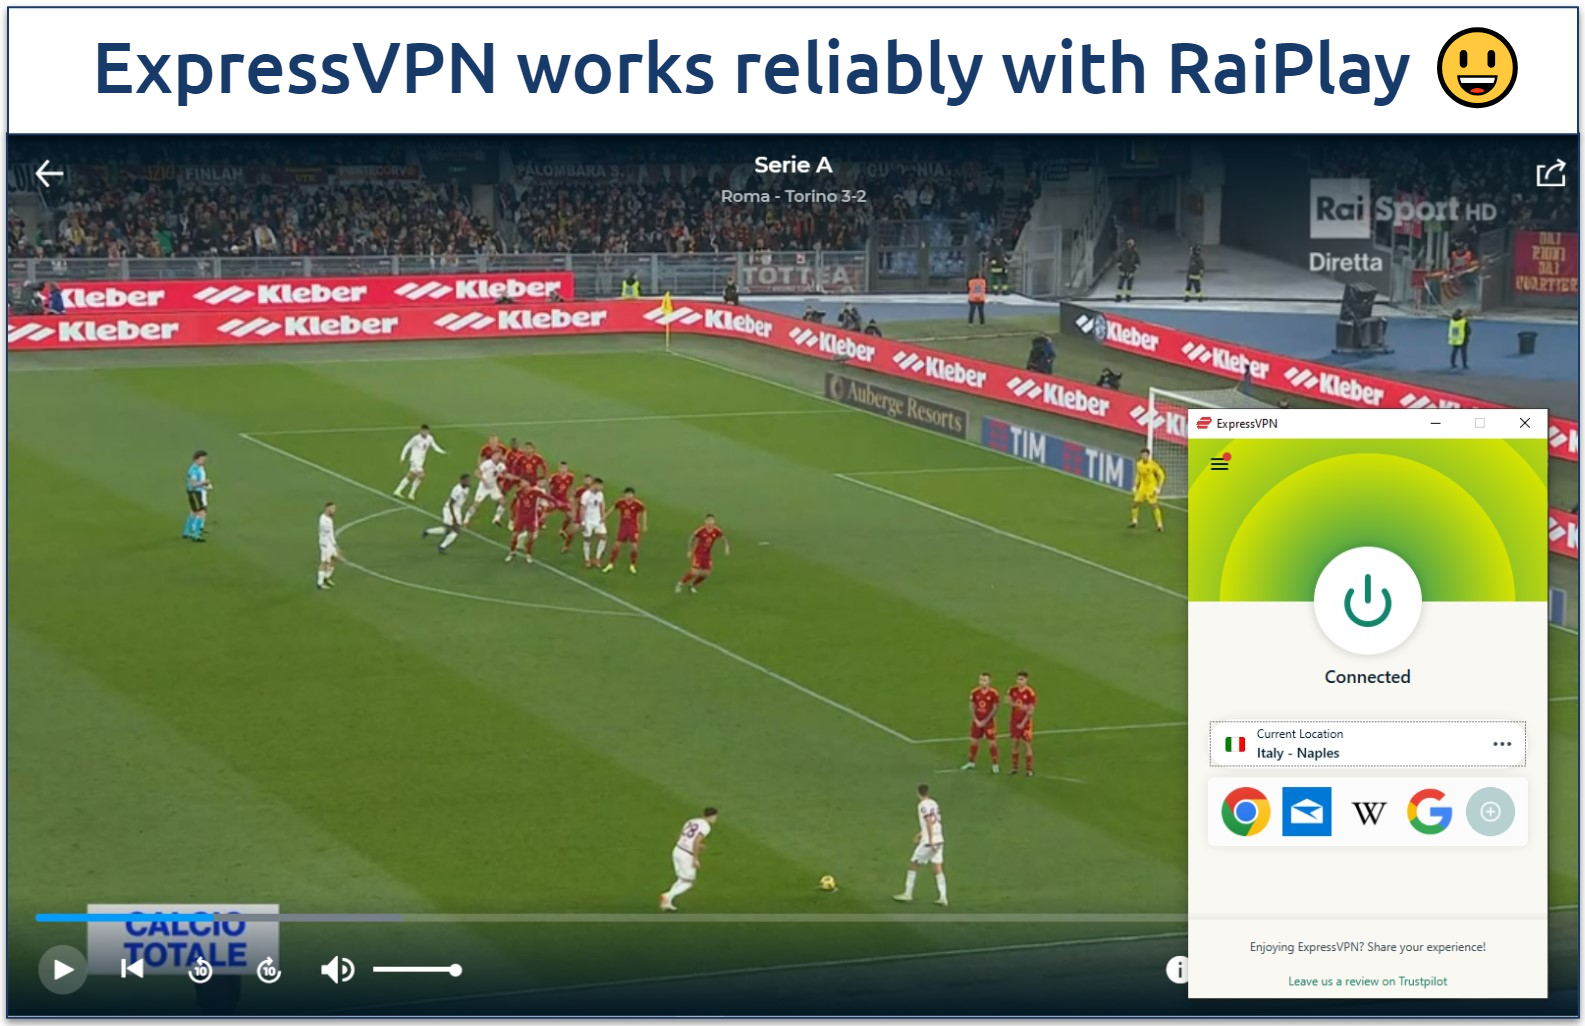 Screenshot showing Serie A match highlights playing on RaiPlay with ExpressVPN connected to Naples server